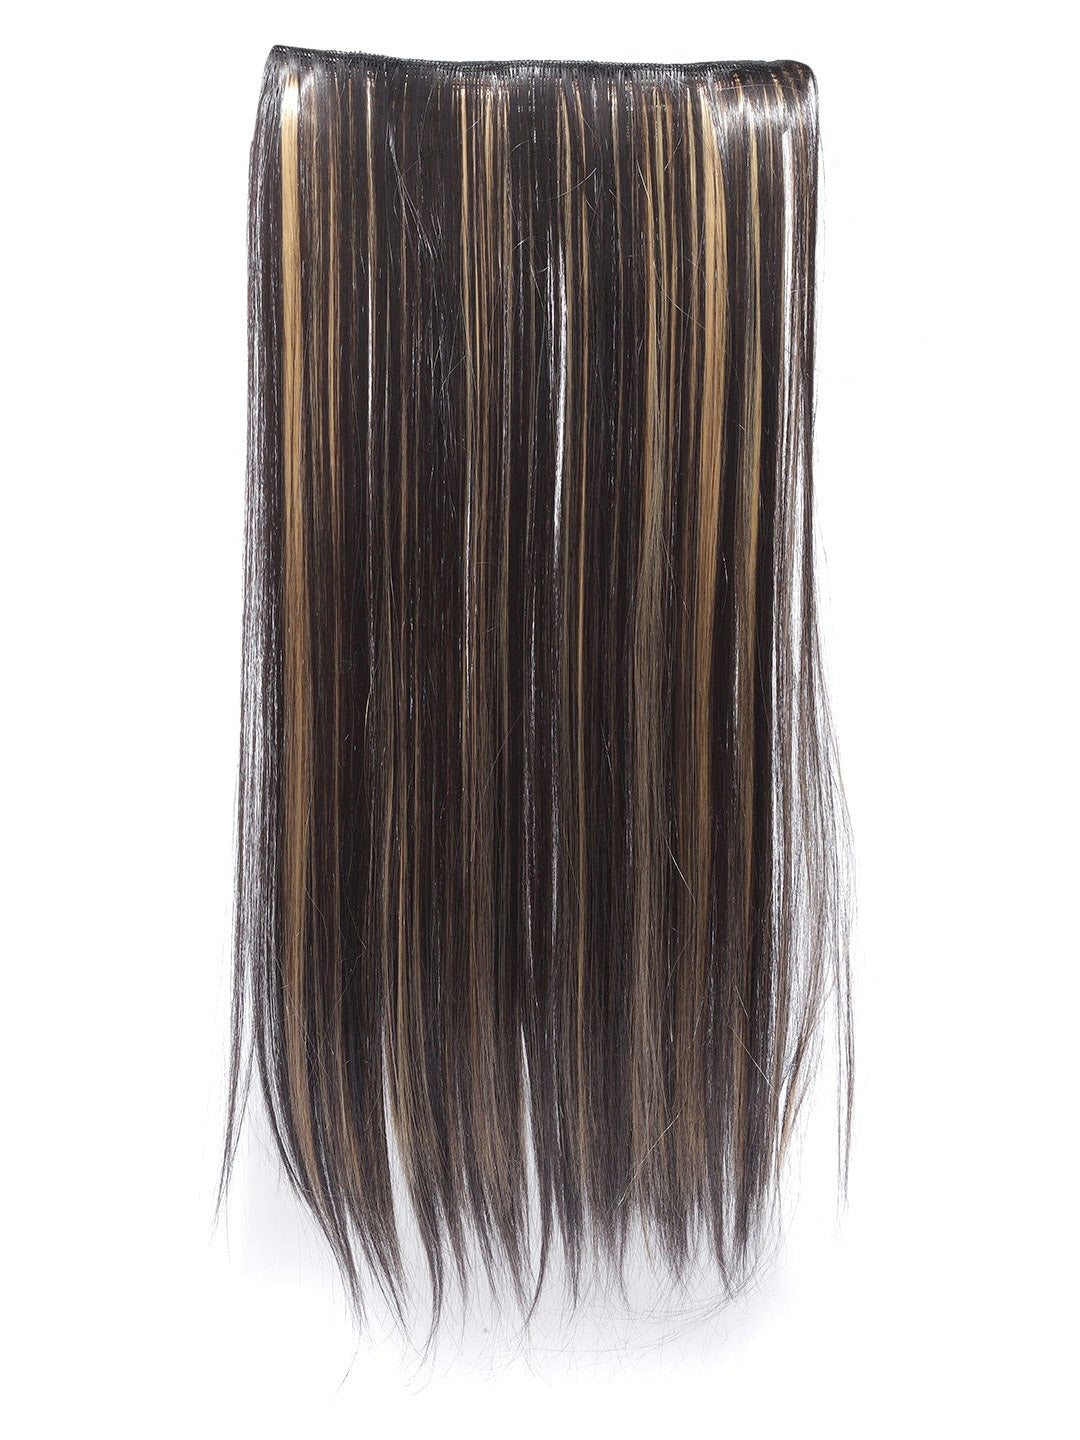 Blueberry golden and brown Straight Hair Extension with 5 clips